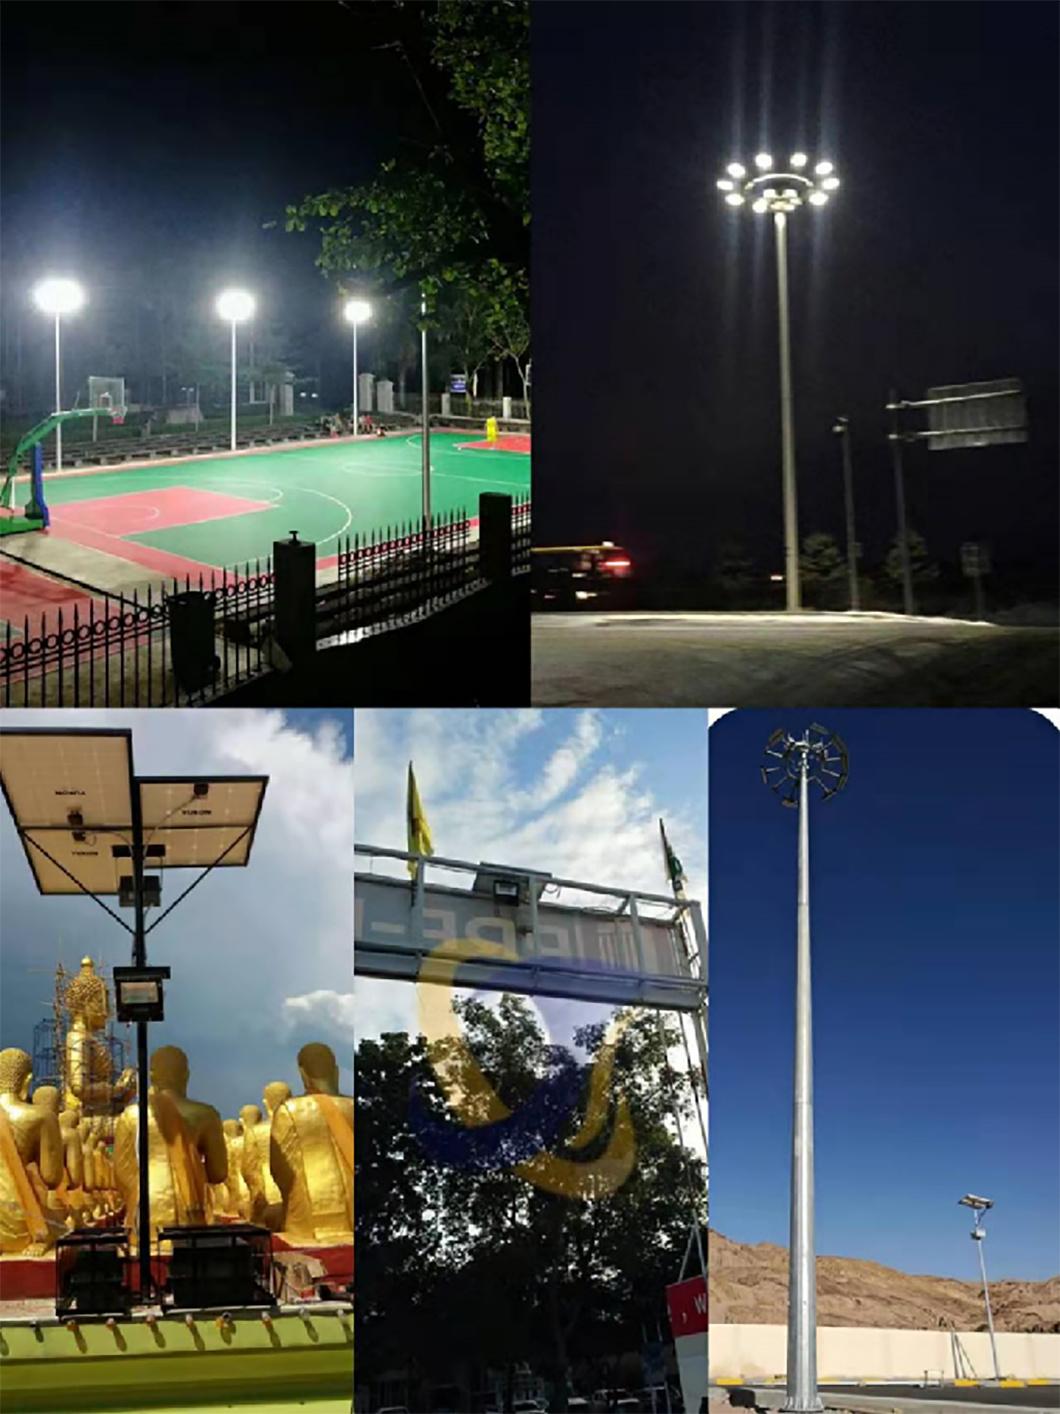 IEC TUV CE Certified 150W Flood Light for High Mast Outdoor Lighting LED Street Lamp 5 Years Warranty